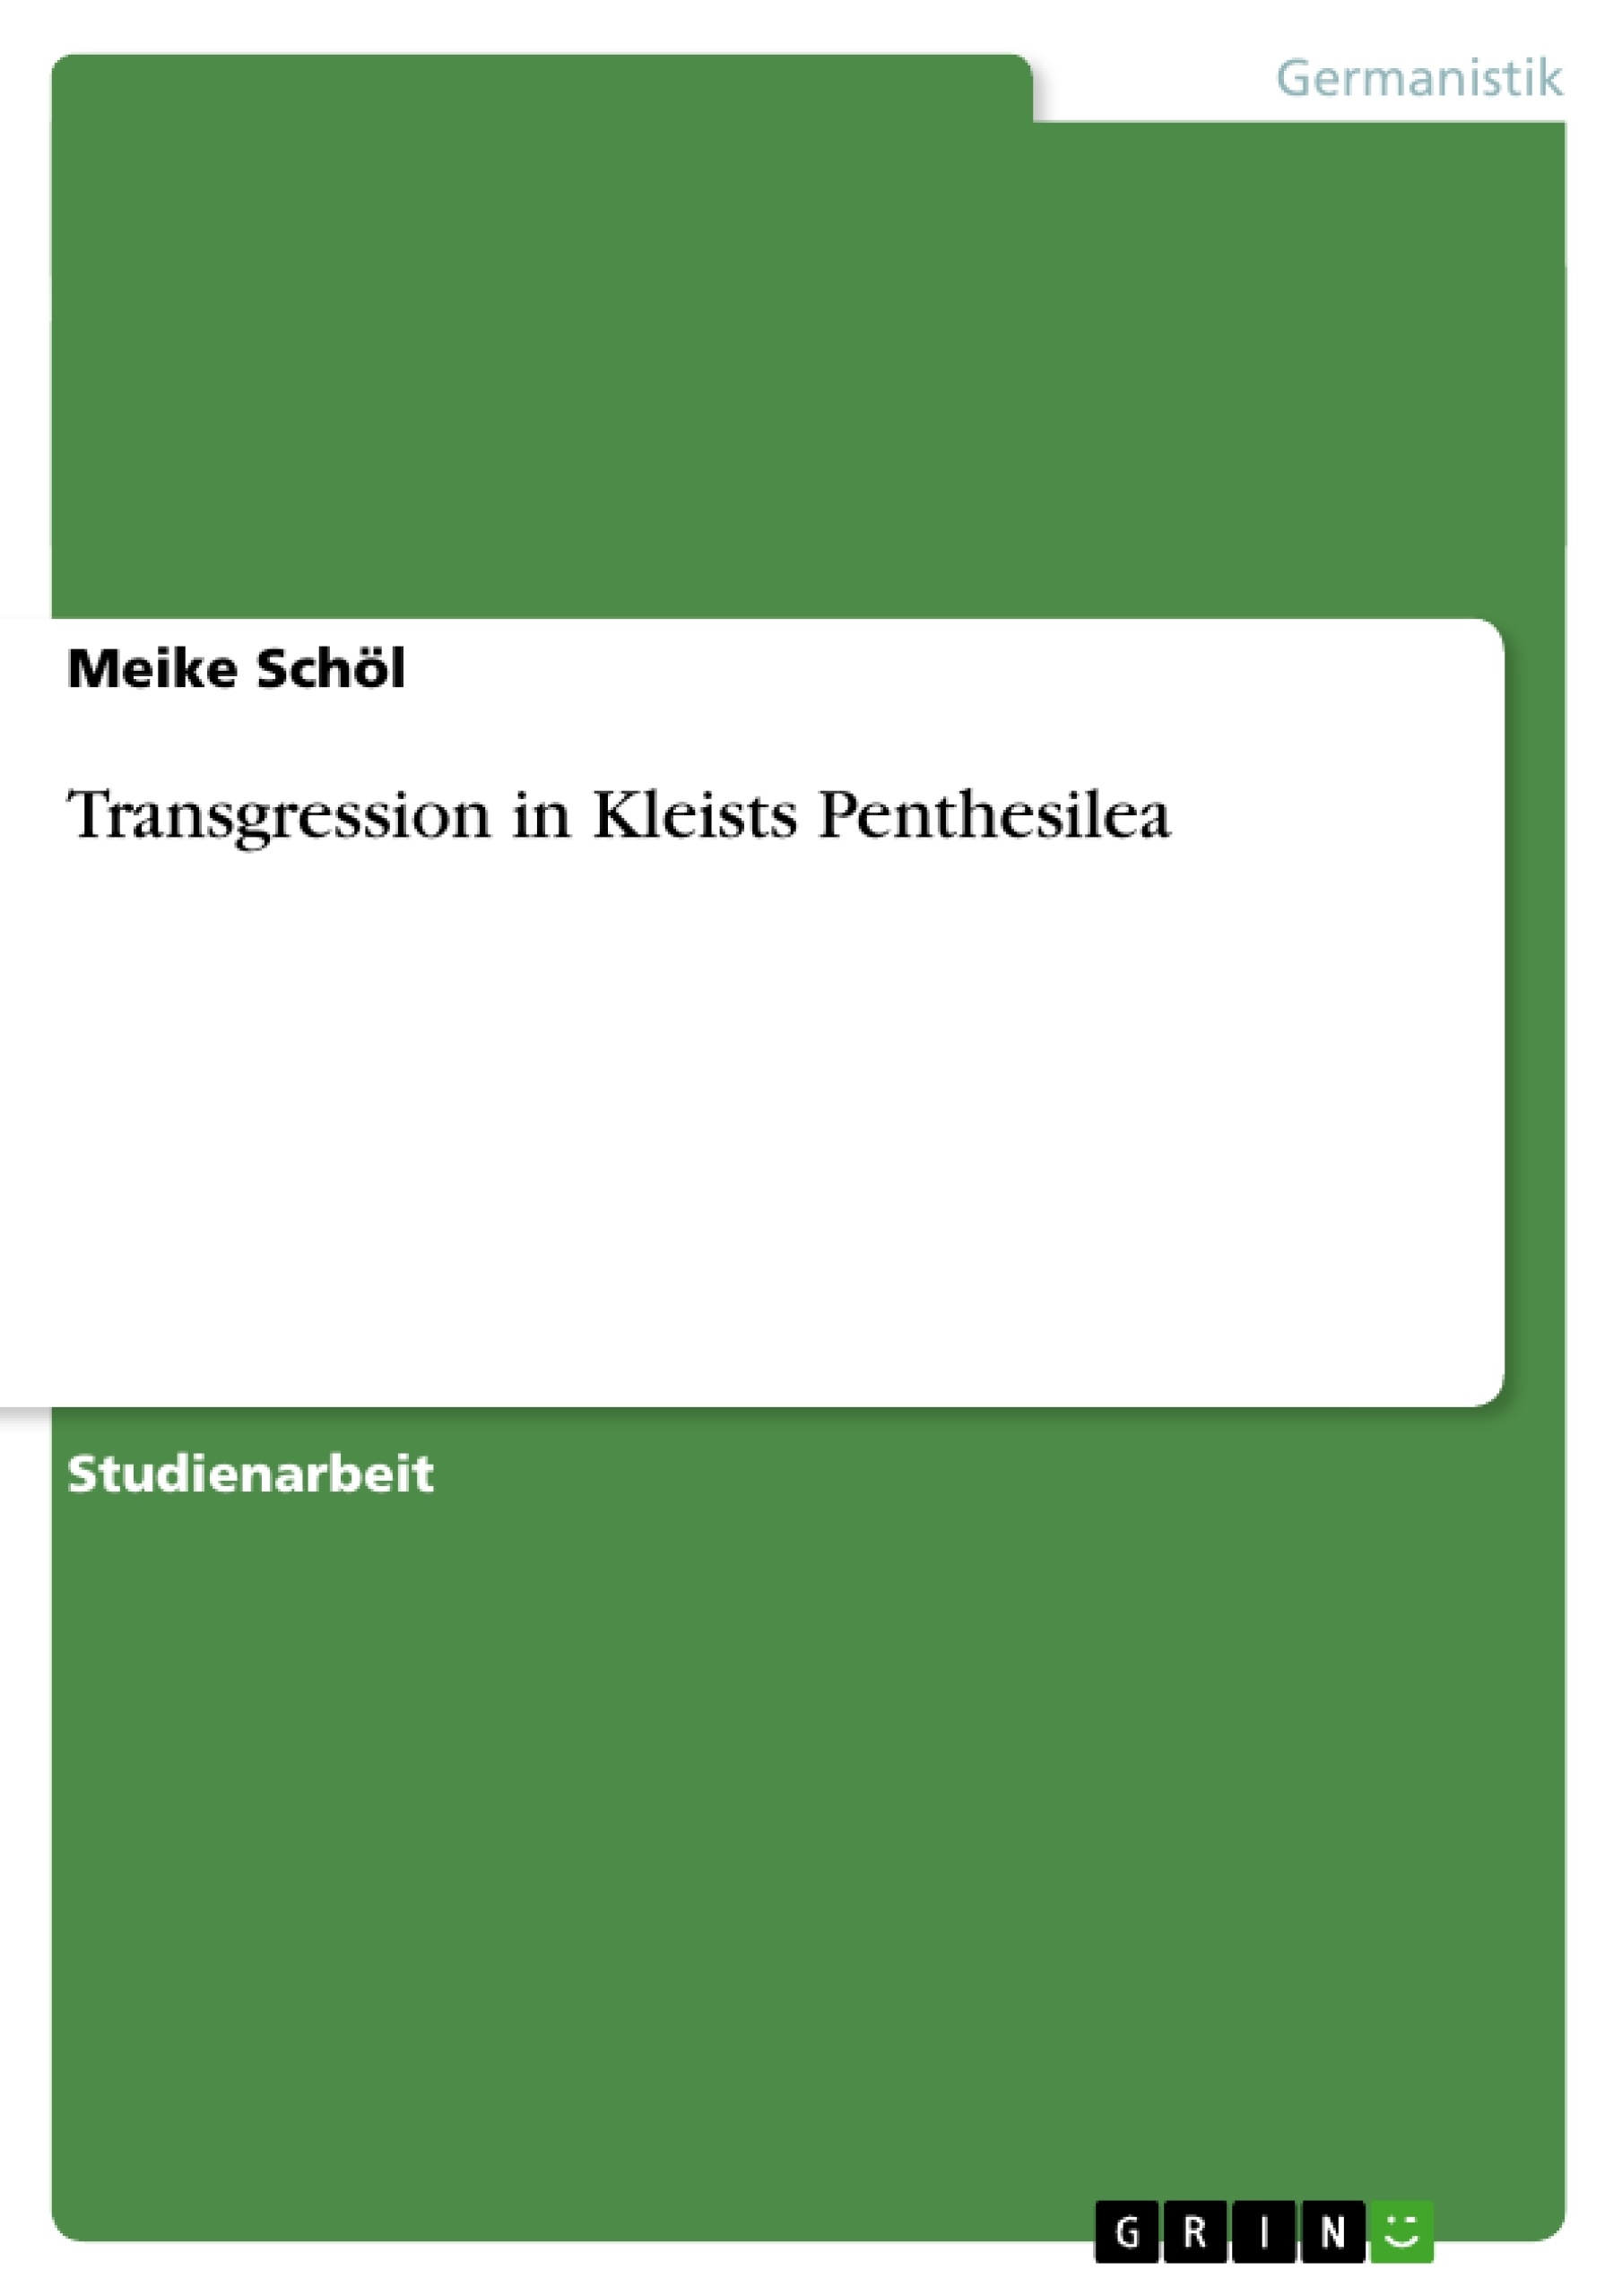 Título: Transgression in Kleists Penthesilea